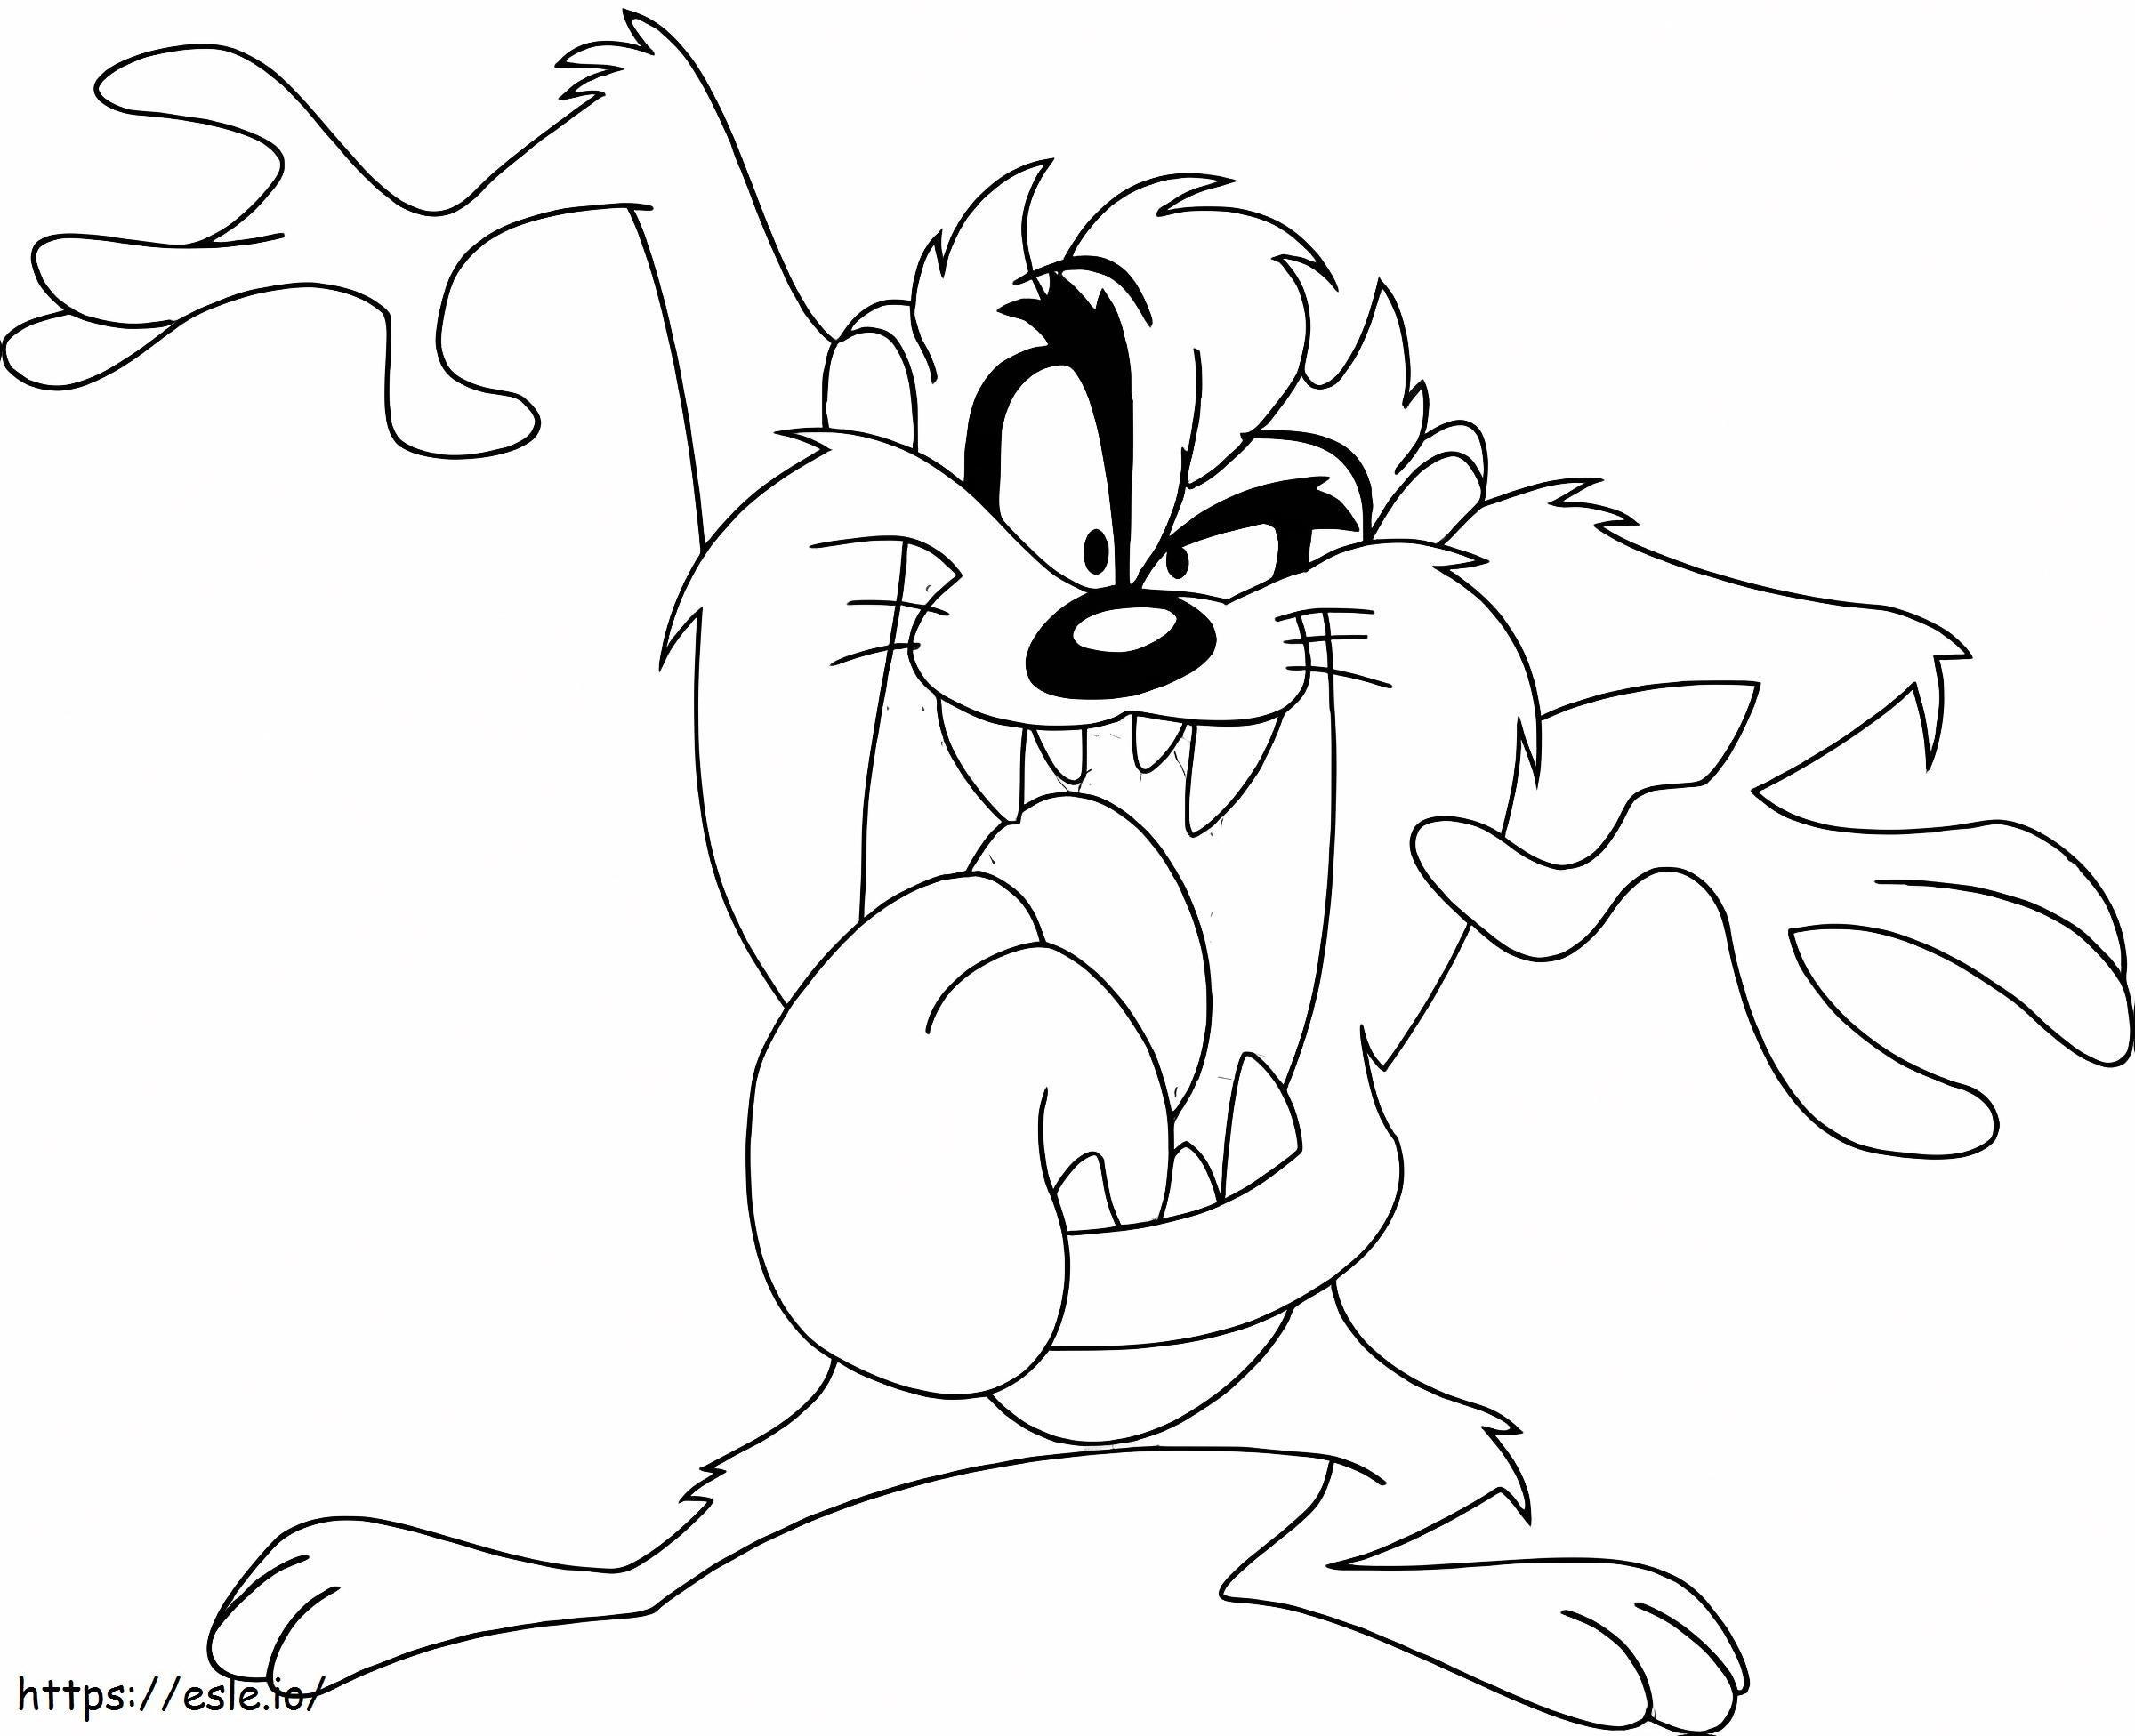 Animal Devil coloring page